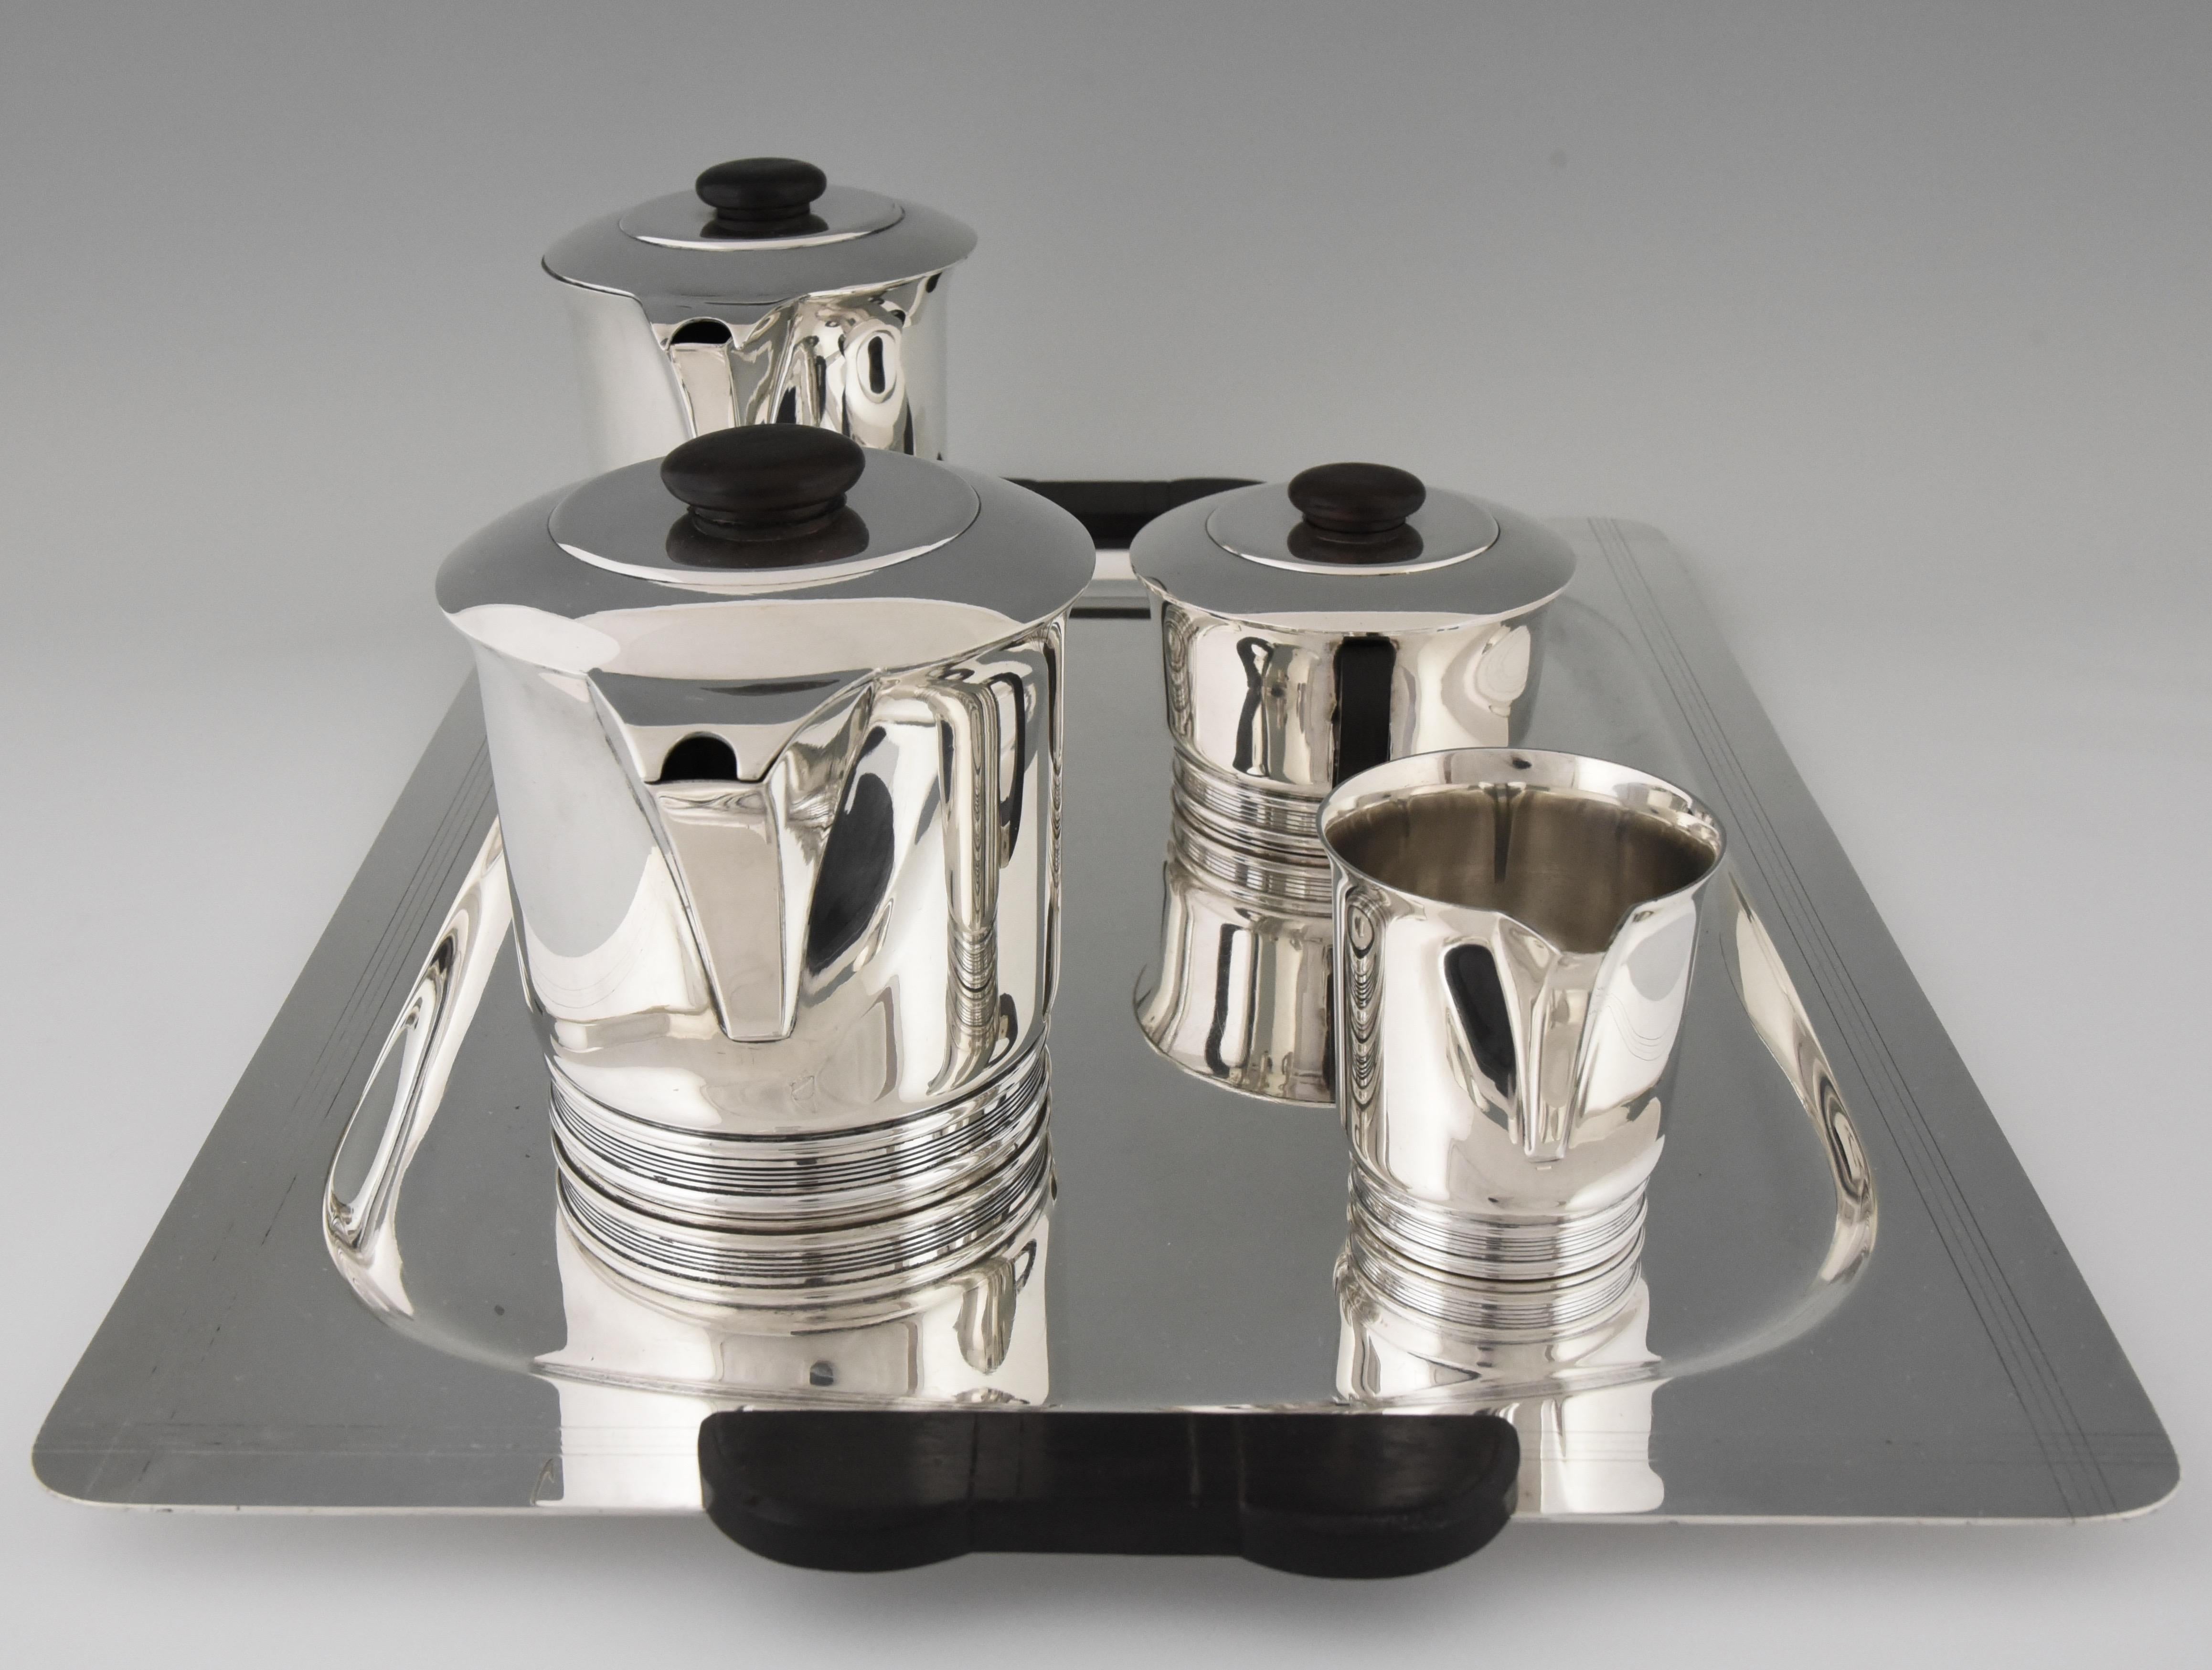 20th Century Art Deco Silvered Tea and Coffee, Set of Five Pieces, Ercuis, France, 1925